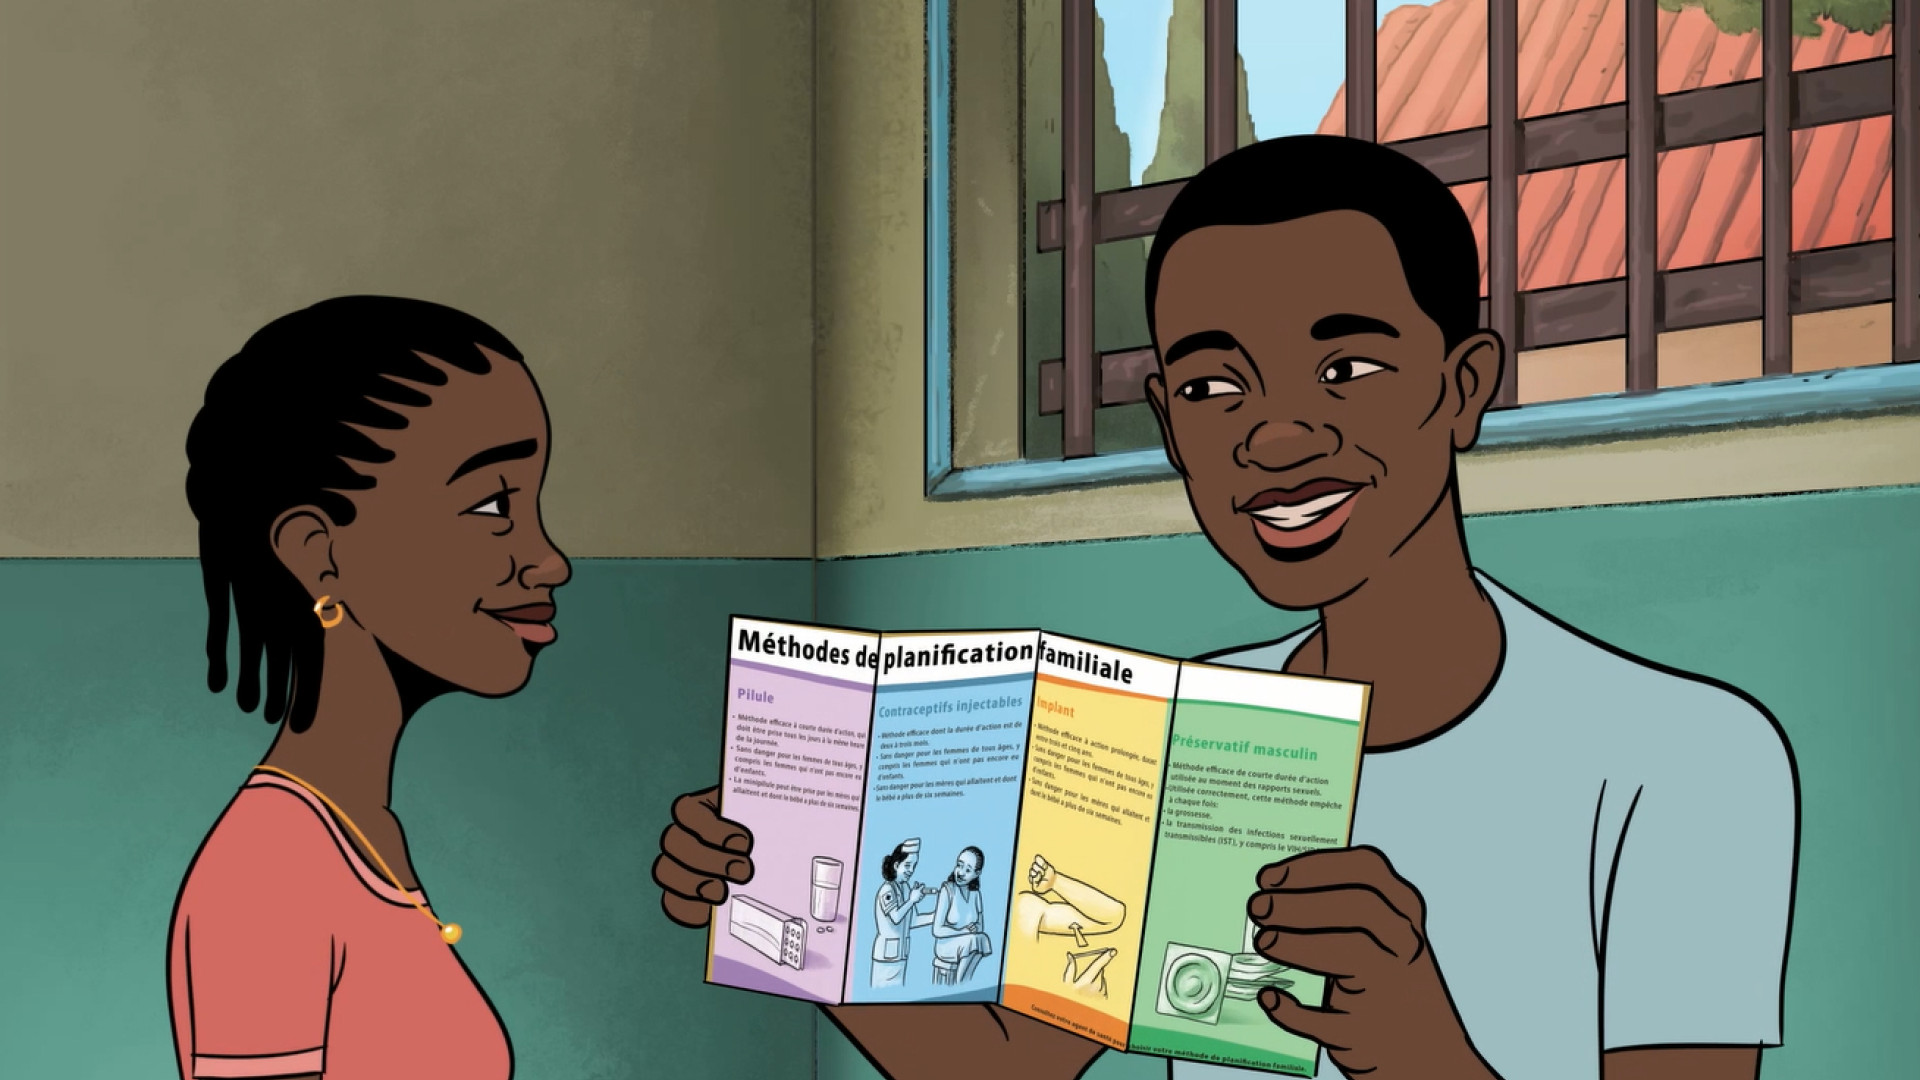 A still from a DMI film promoting healthy family planning behaviours